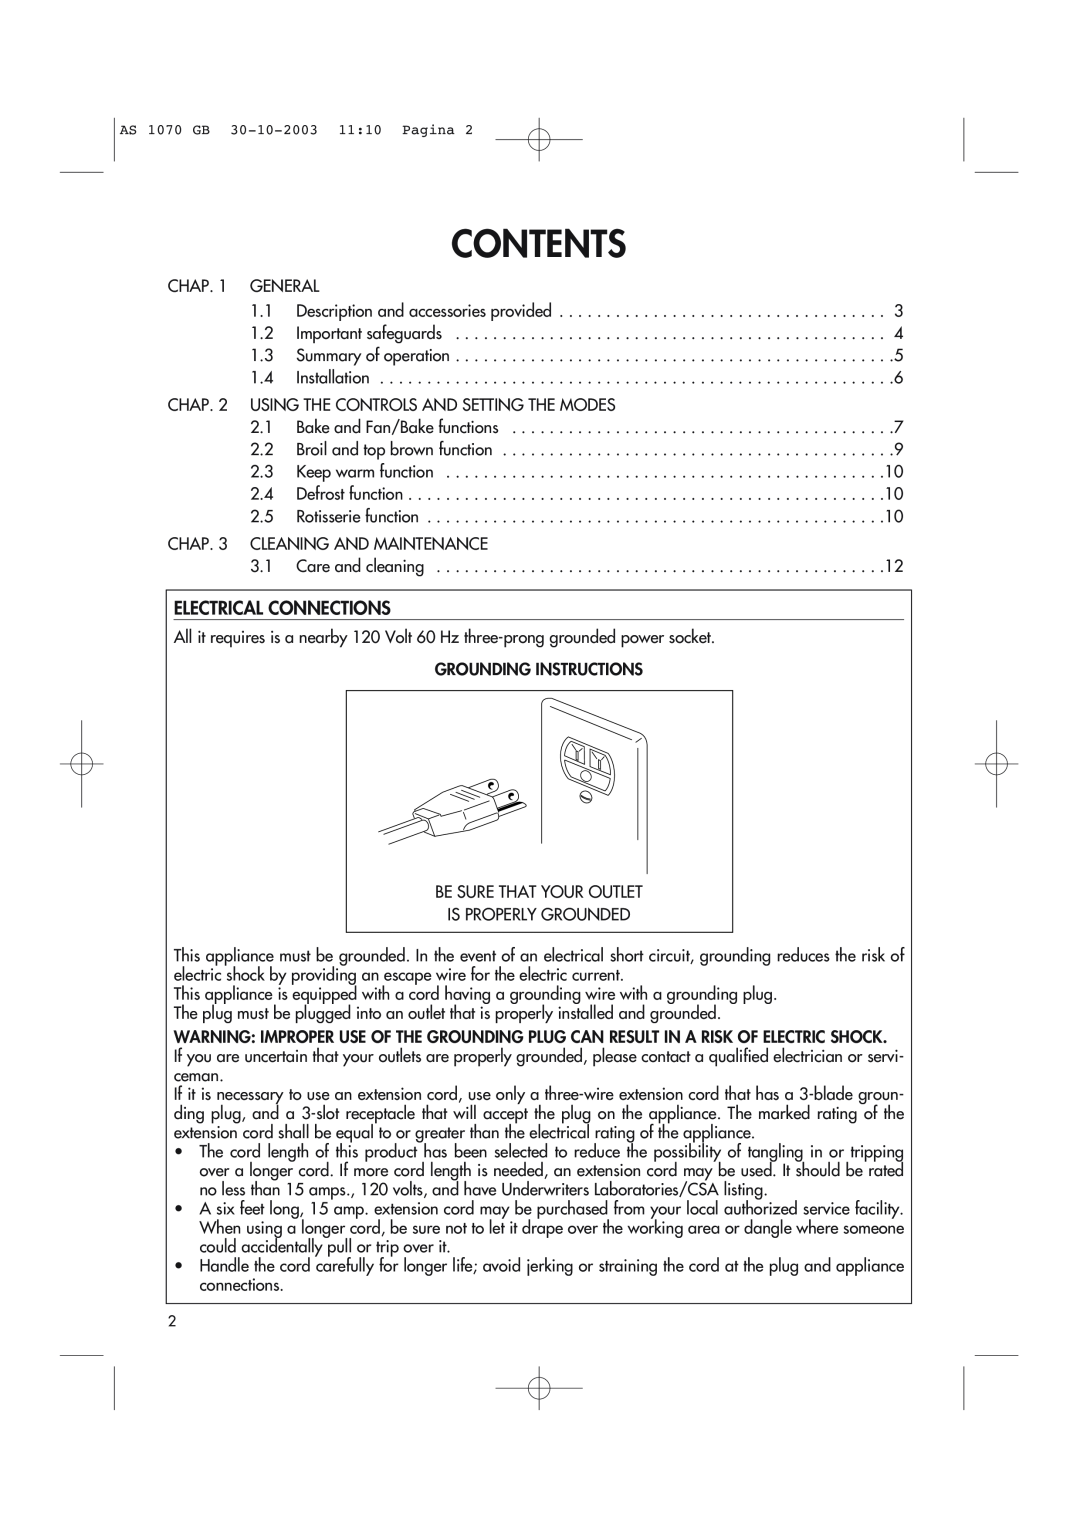 DeLonghi AS-1070 manual Contents, Electrical Connections 